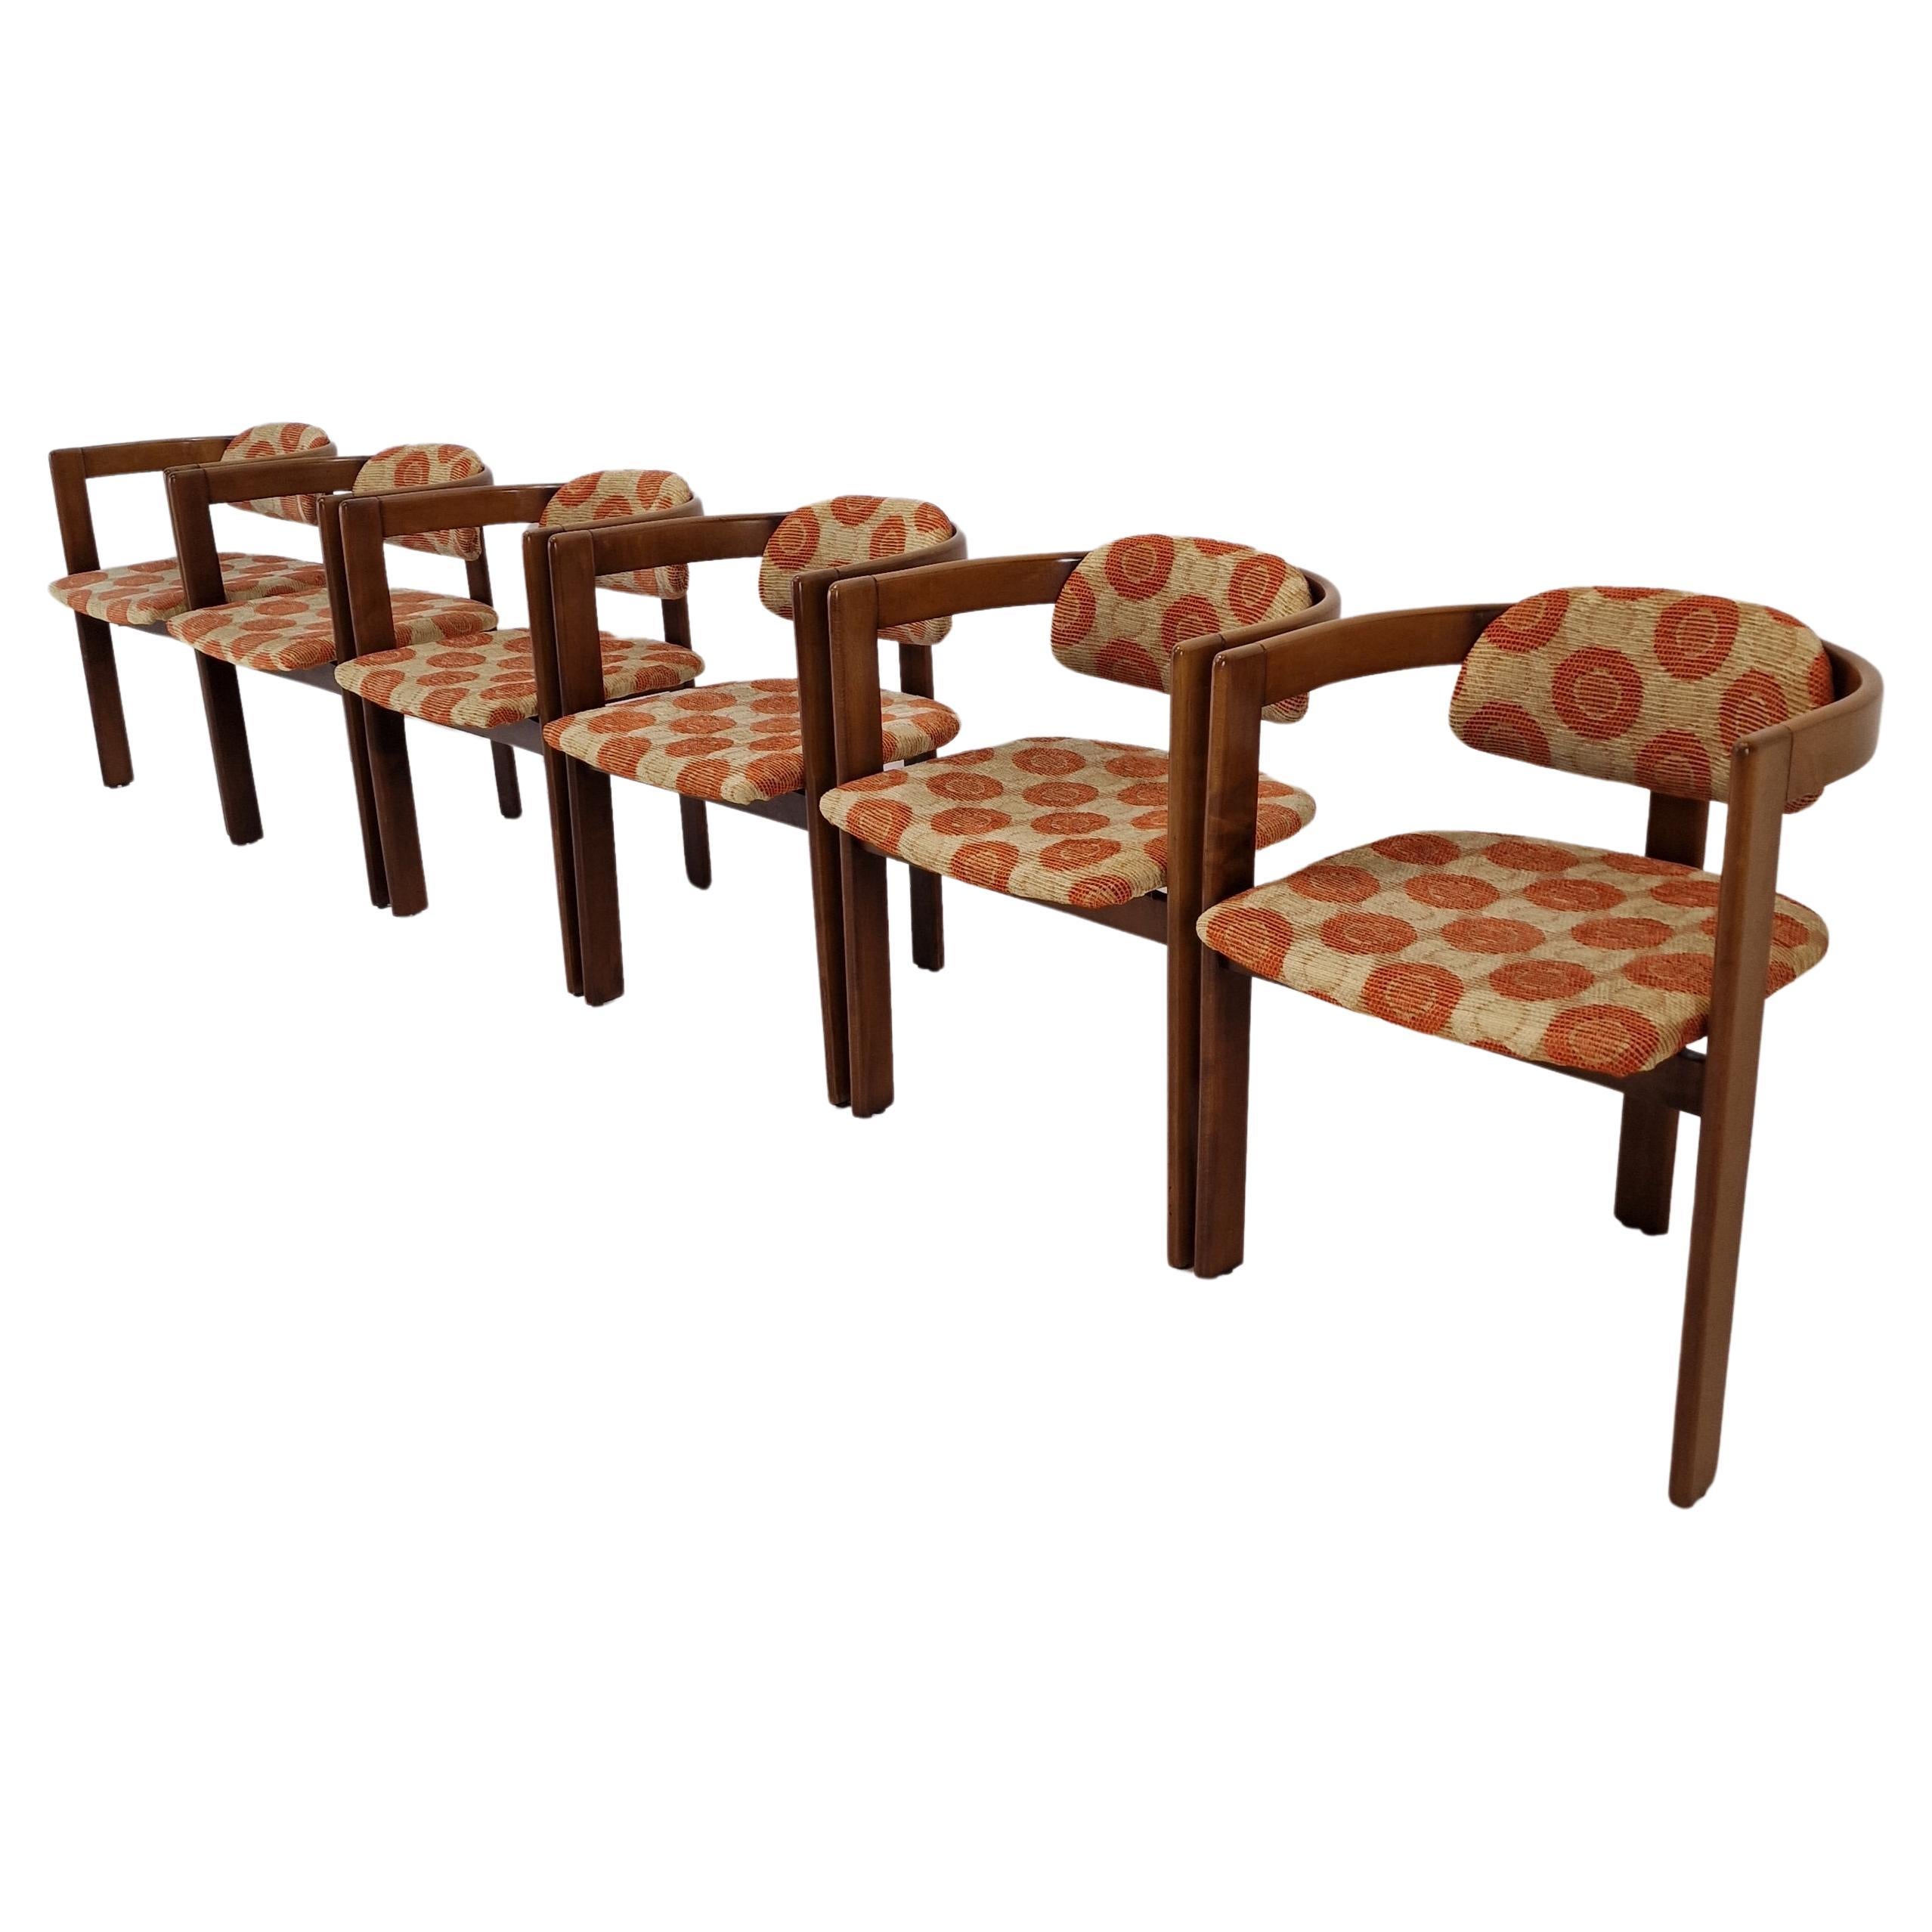 Midcentury Set of 6 Italian Wooden Armchairs, 1960's For Sale